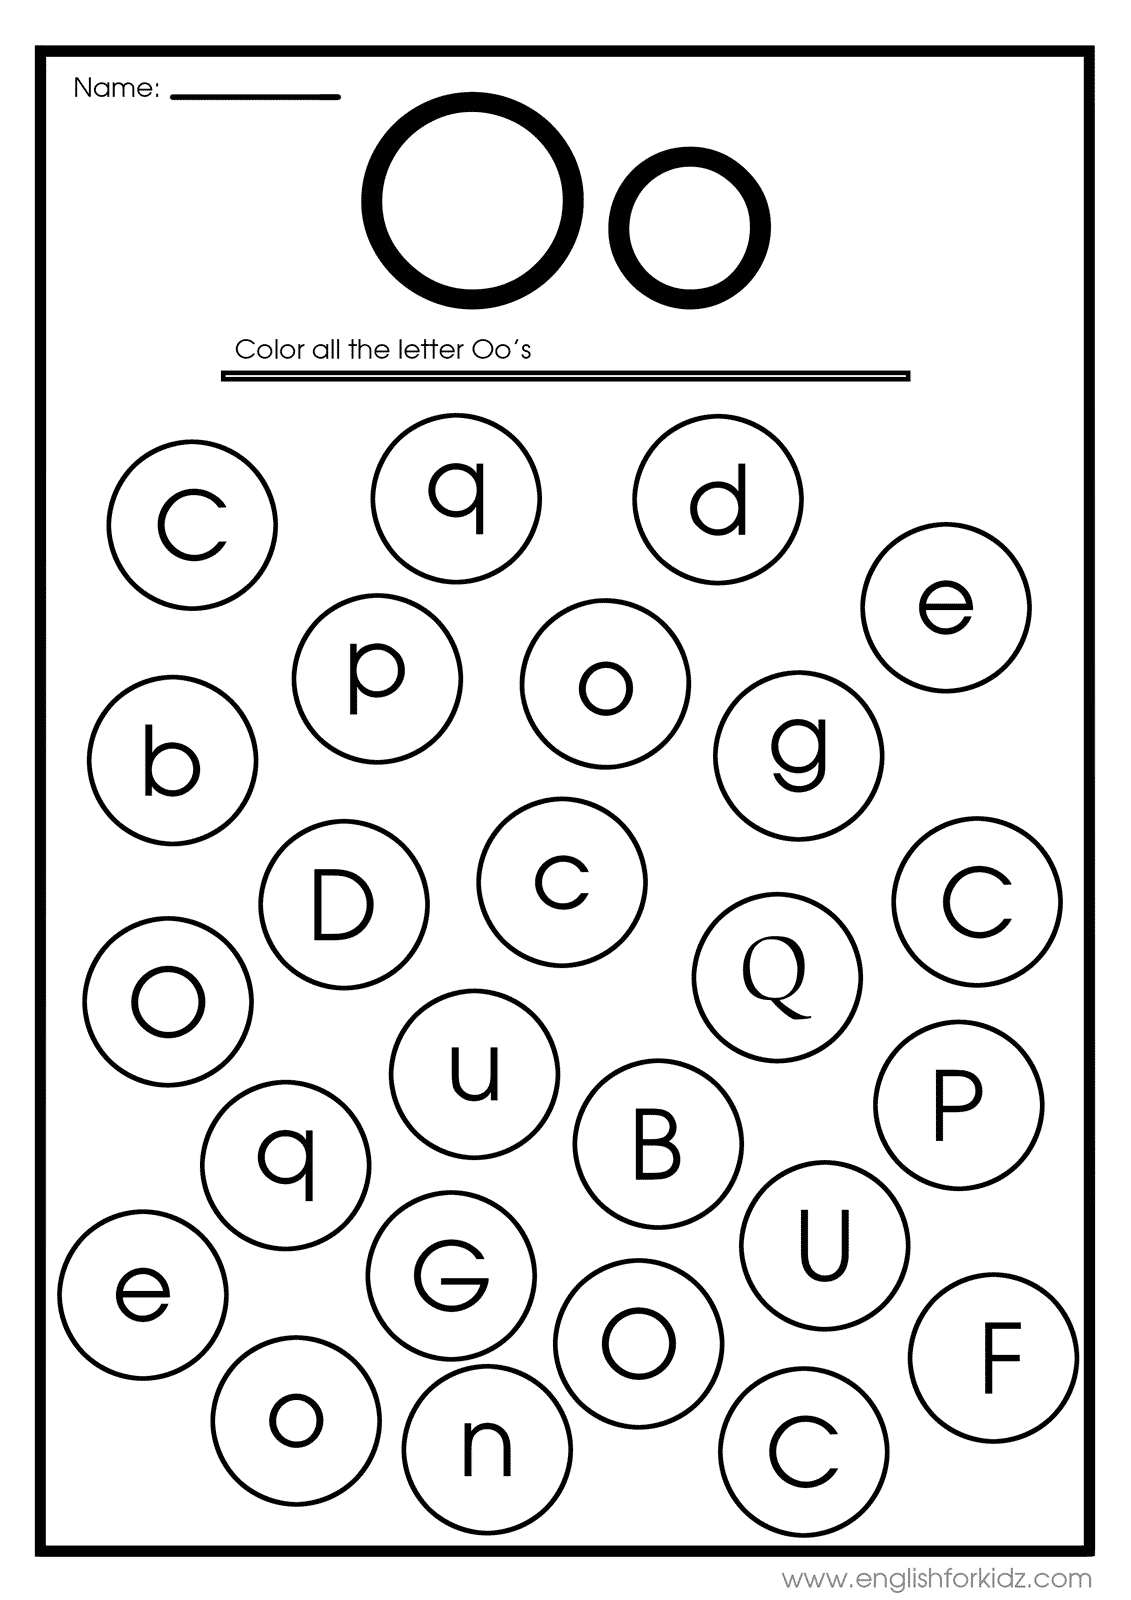 English for kids step by step letter o worksheets flash cards coloring pages